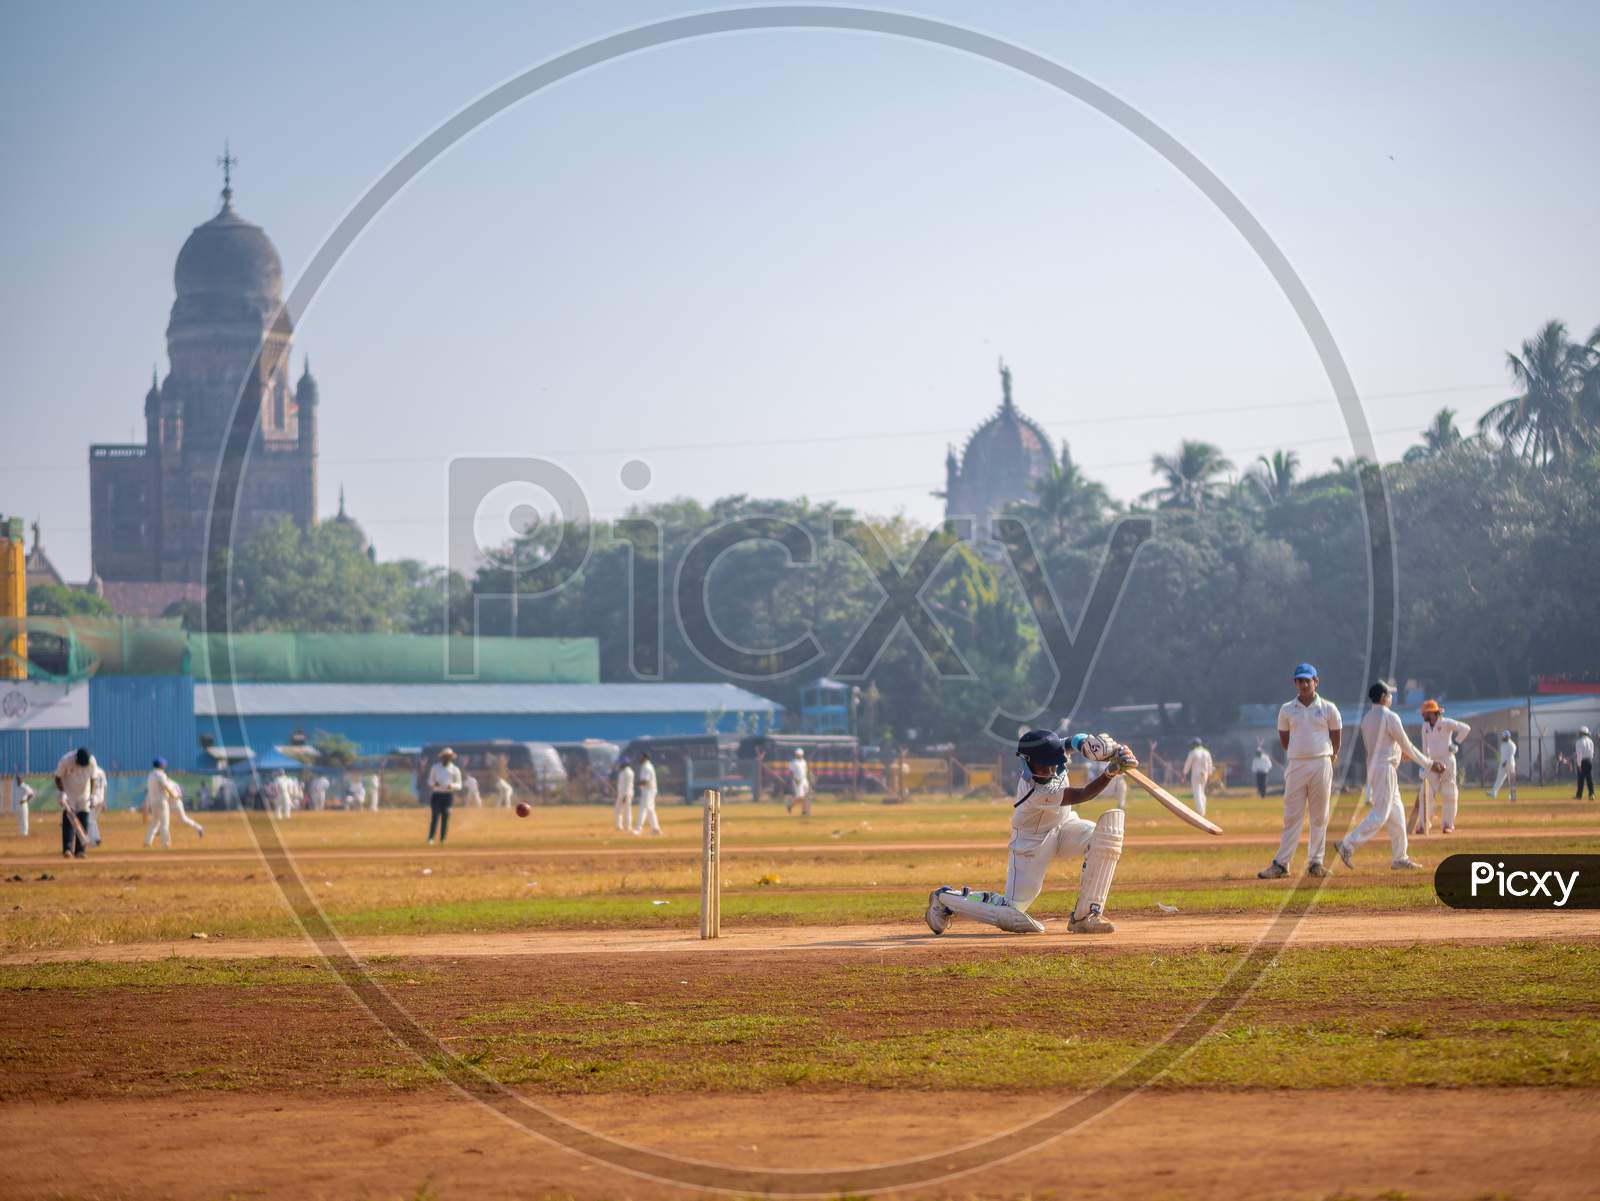 Indias Most Famous Sport Cricket Practiced By Kids At Local Mumbai Ground